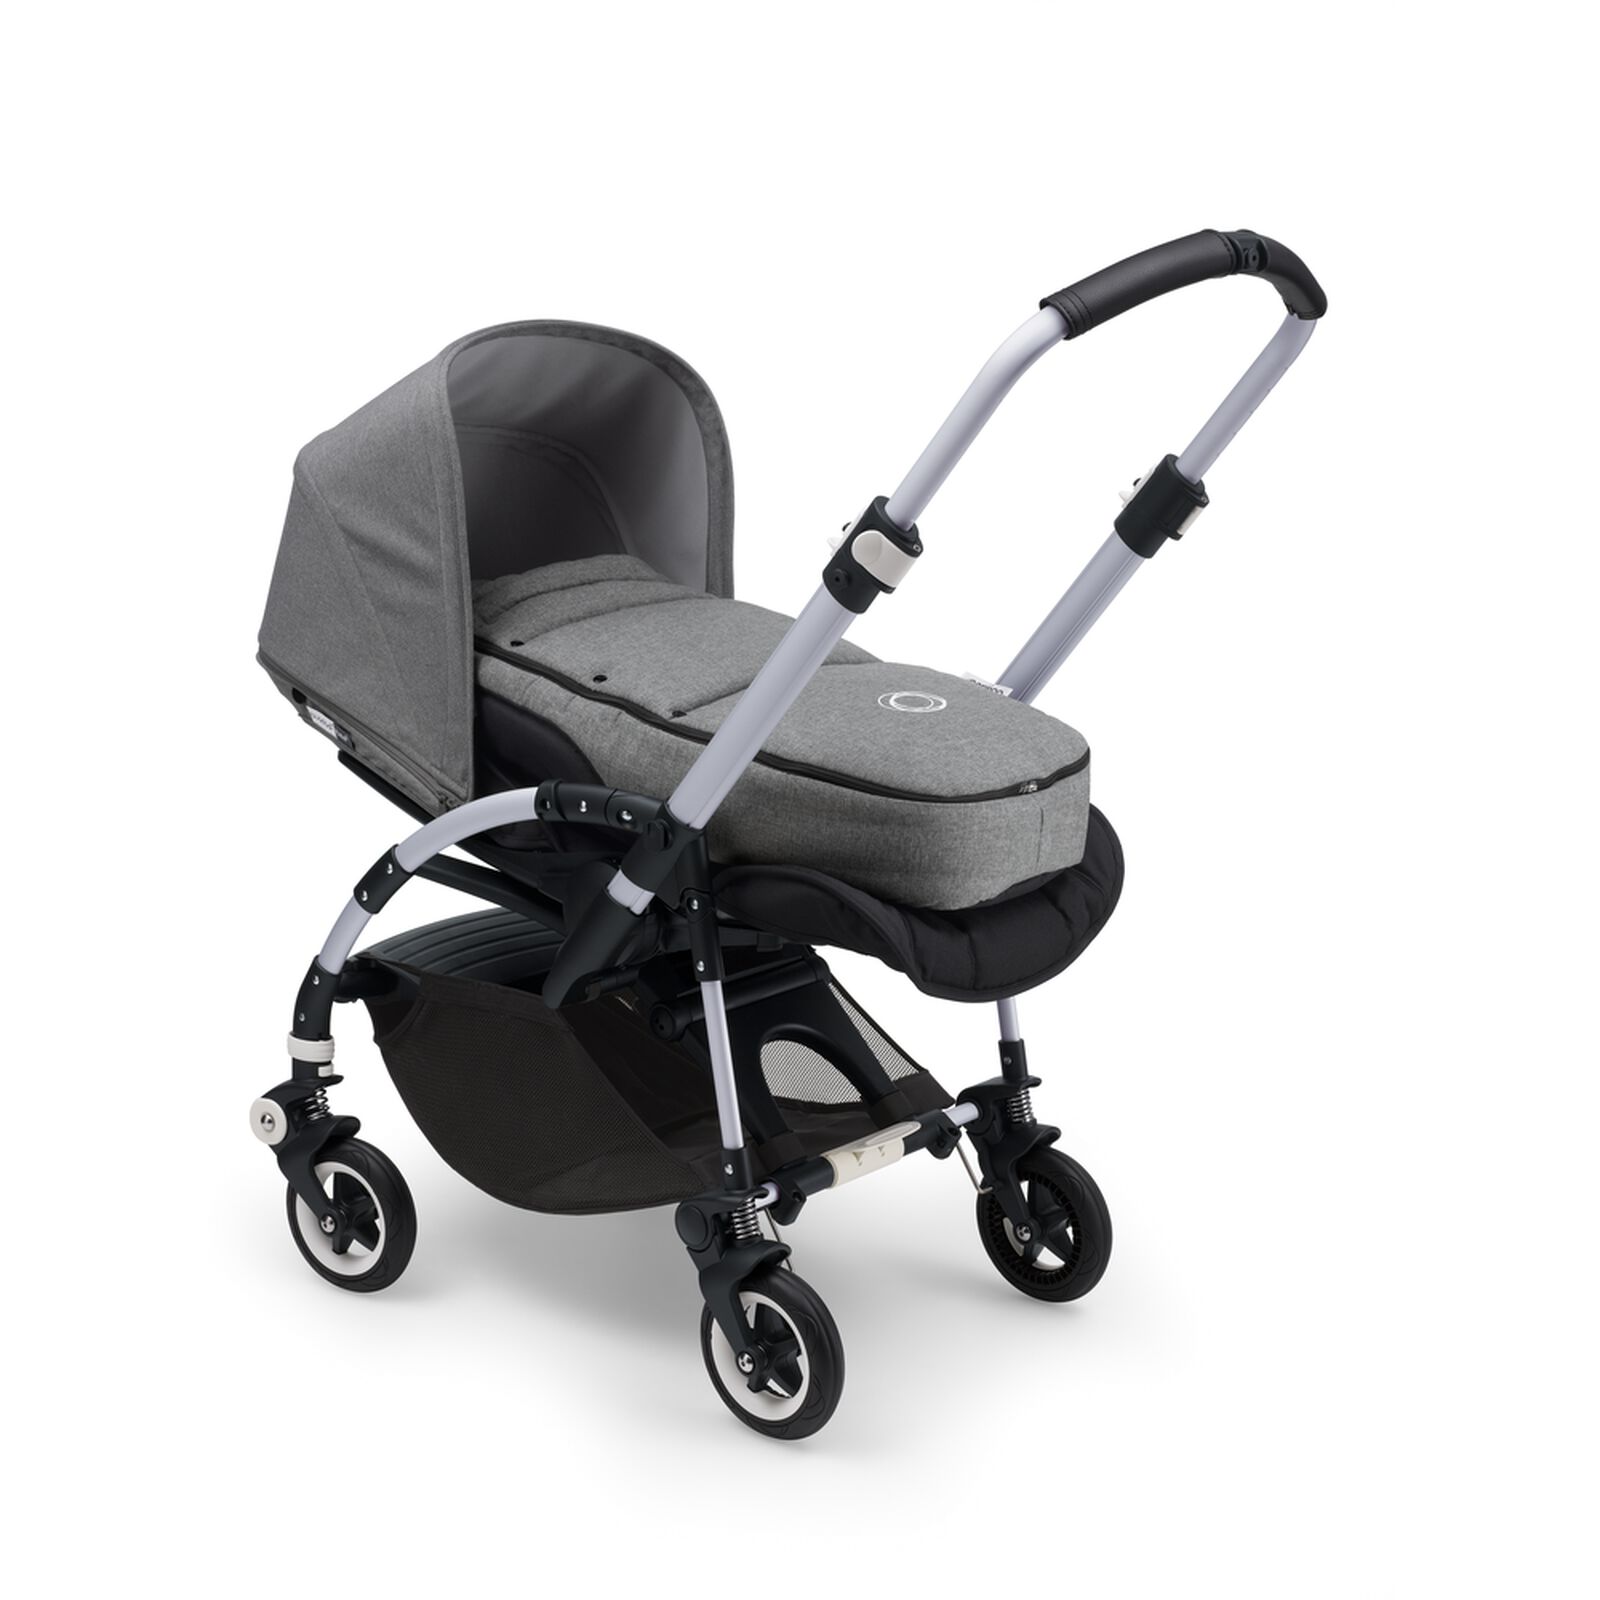 Bugaboo baby cocon - View 2